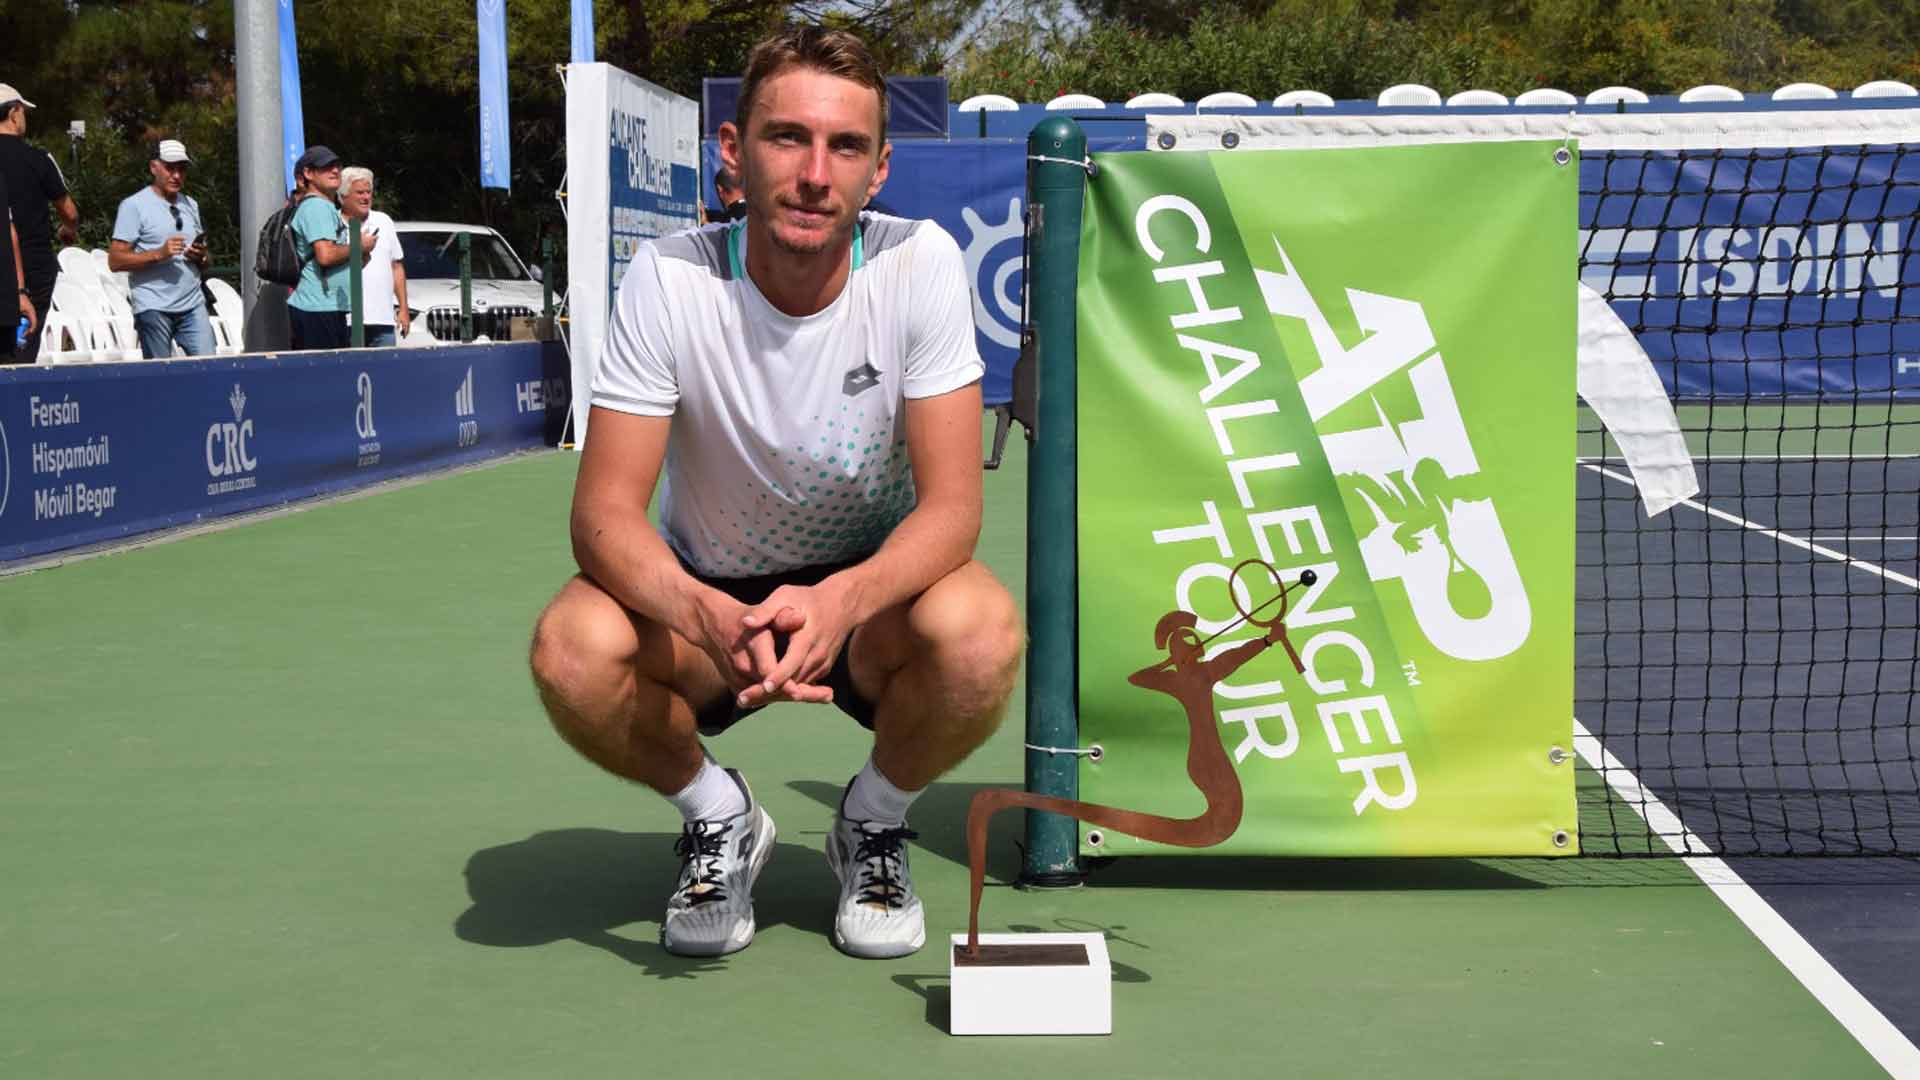 Lukas Klein wins his second Challenger of 2022 at the Alicante Challenger.